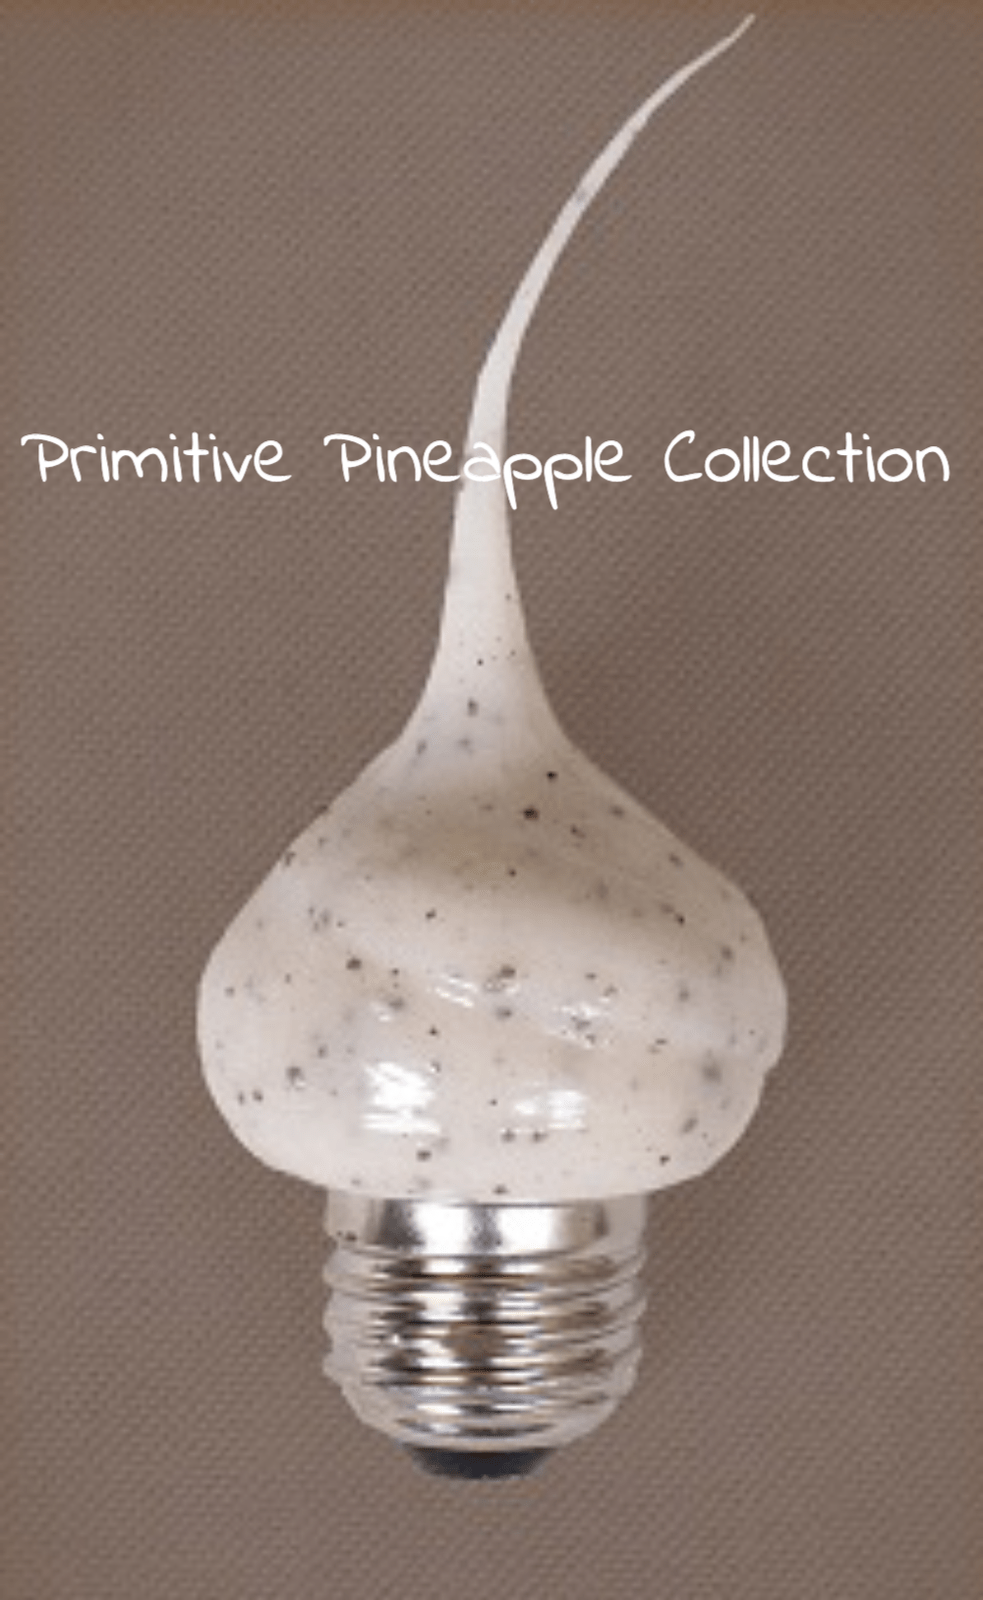 Primitive/Country Cookies and Cream Scent Silicone 7.5 W Med Base Light Bulb - The Primitive Pineapple Collection